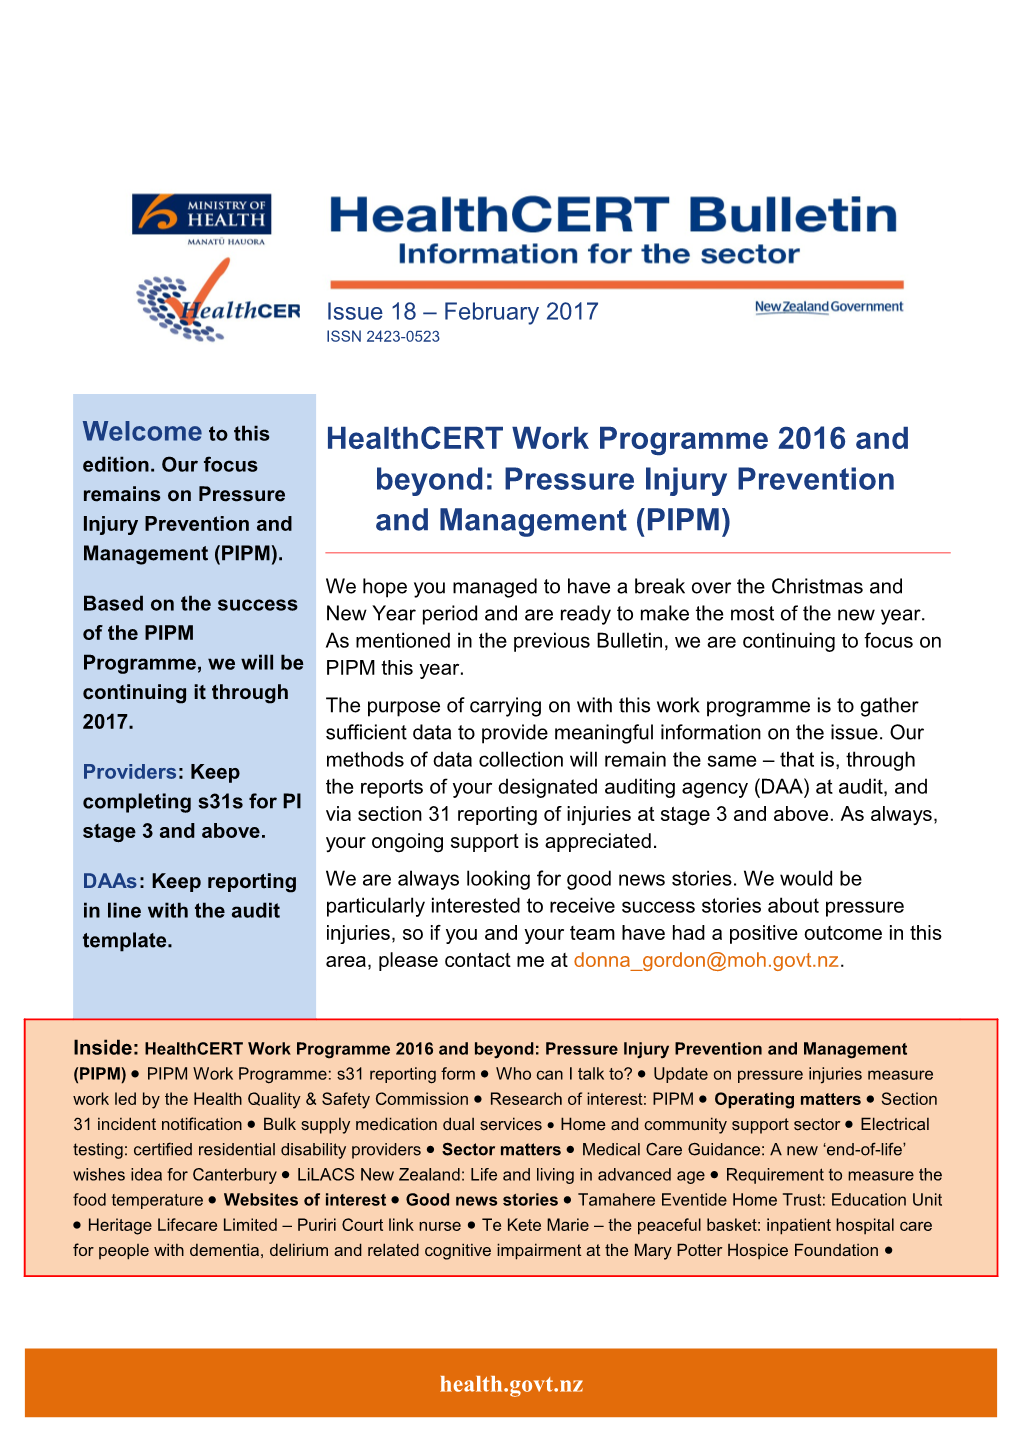 Healthcert Work Programme 2016 and Beyond: Pressure Injury Prevention and Management (PIPM)